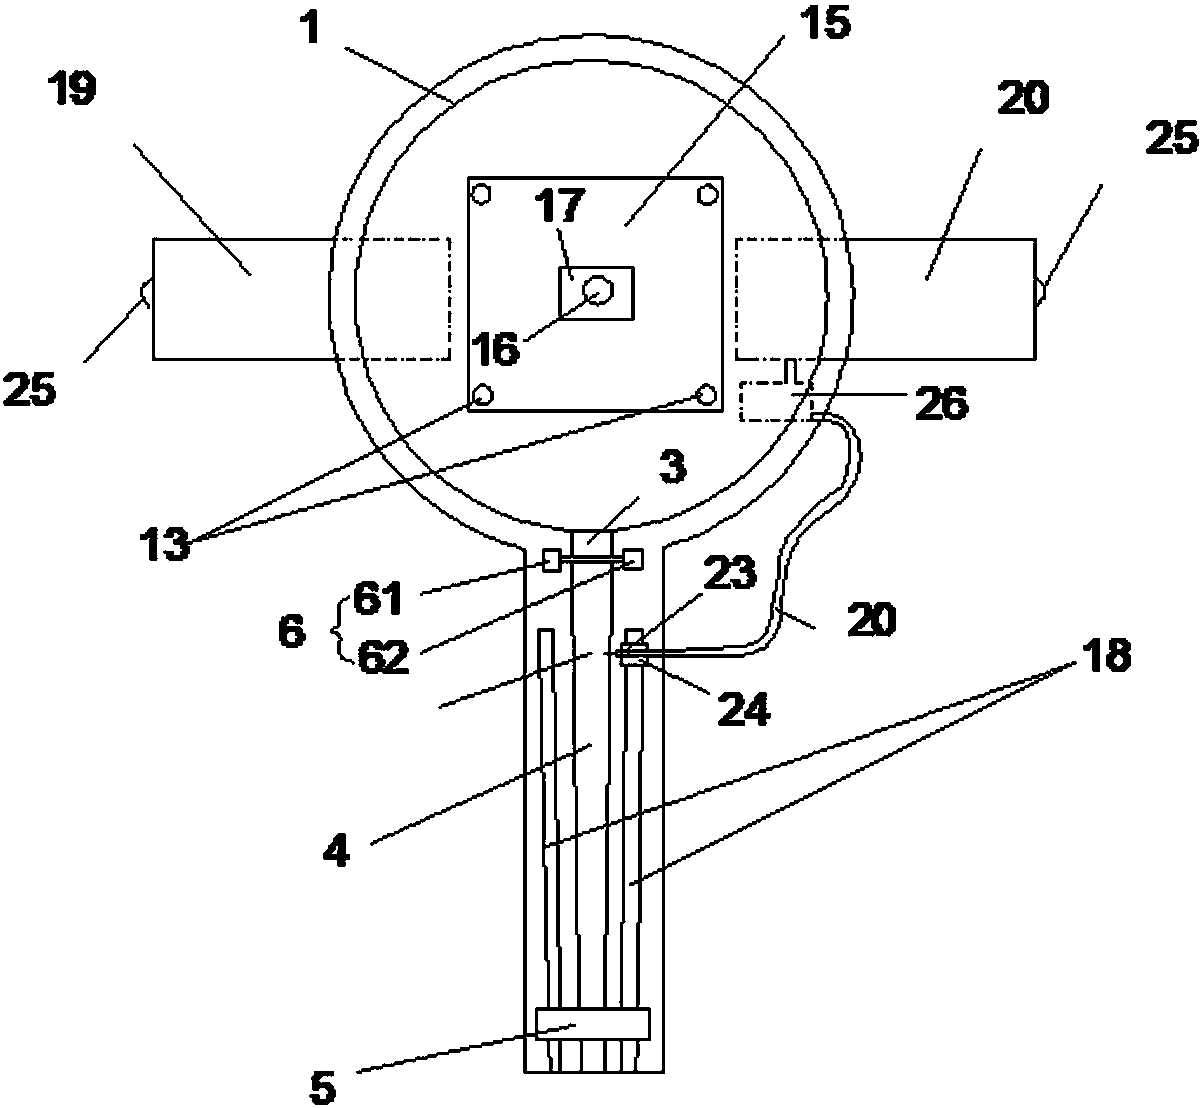 An operation method of a simple mouse experiment auxiliary device